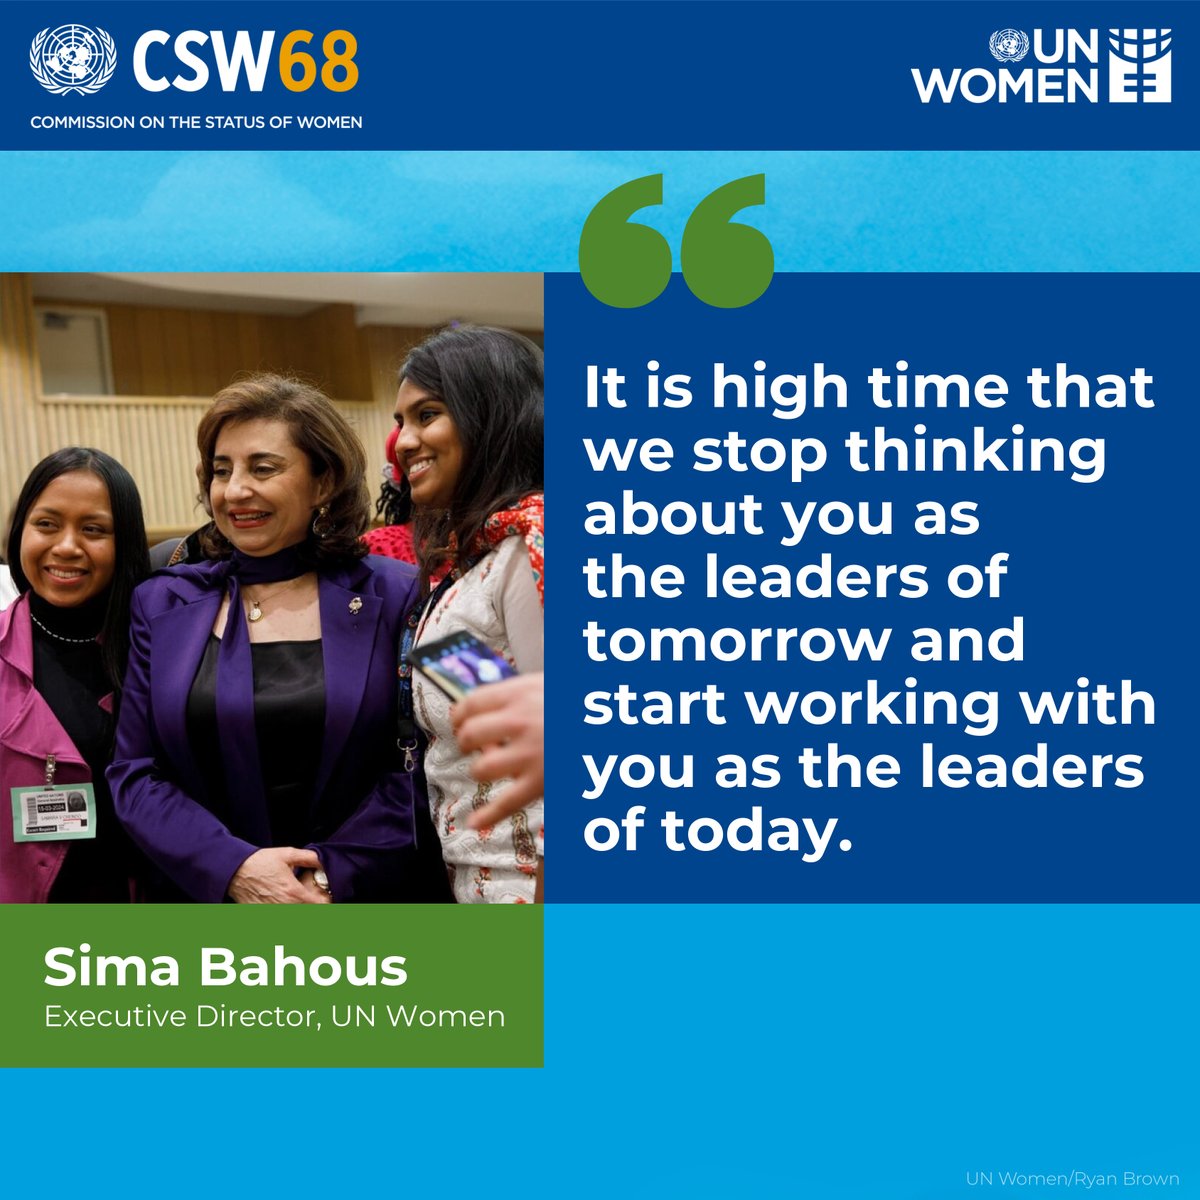 👏We need to👏start working with youth👏as the leaders of TODAY👏 We echo @‌unwomenchief’s call to action and applaud the valuable contributions of youth and adolescents at @‌UN_CSW. Learn how they are shaping the #CSW68 agenda: unwo.men/YAIj50QYSAM #InvestInWomen